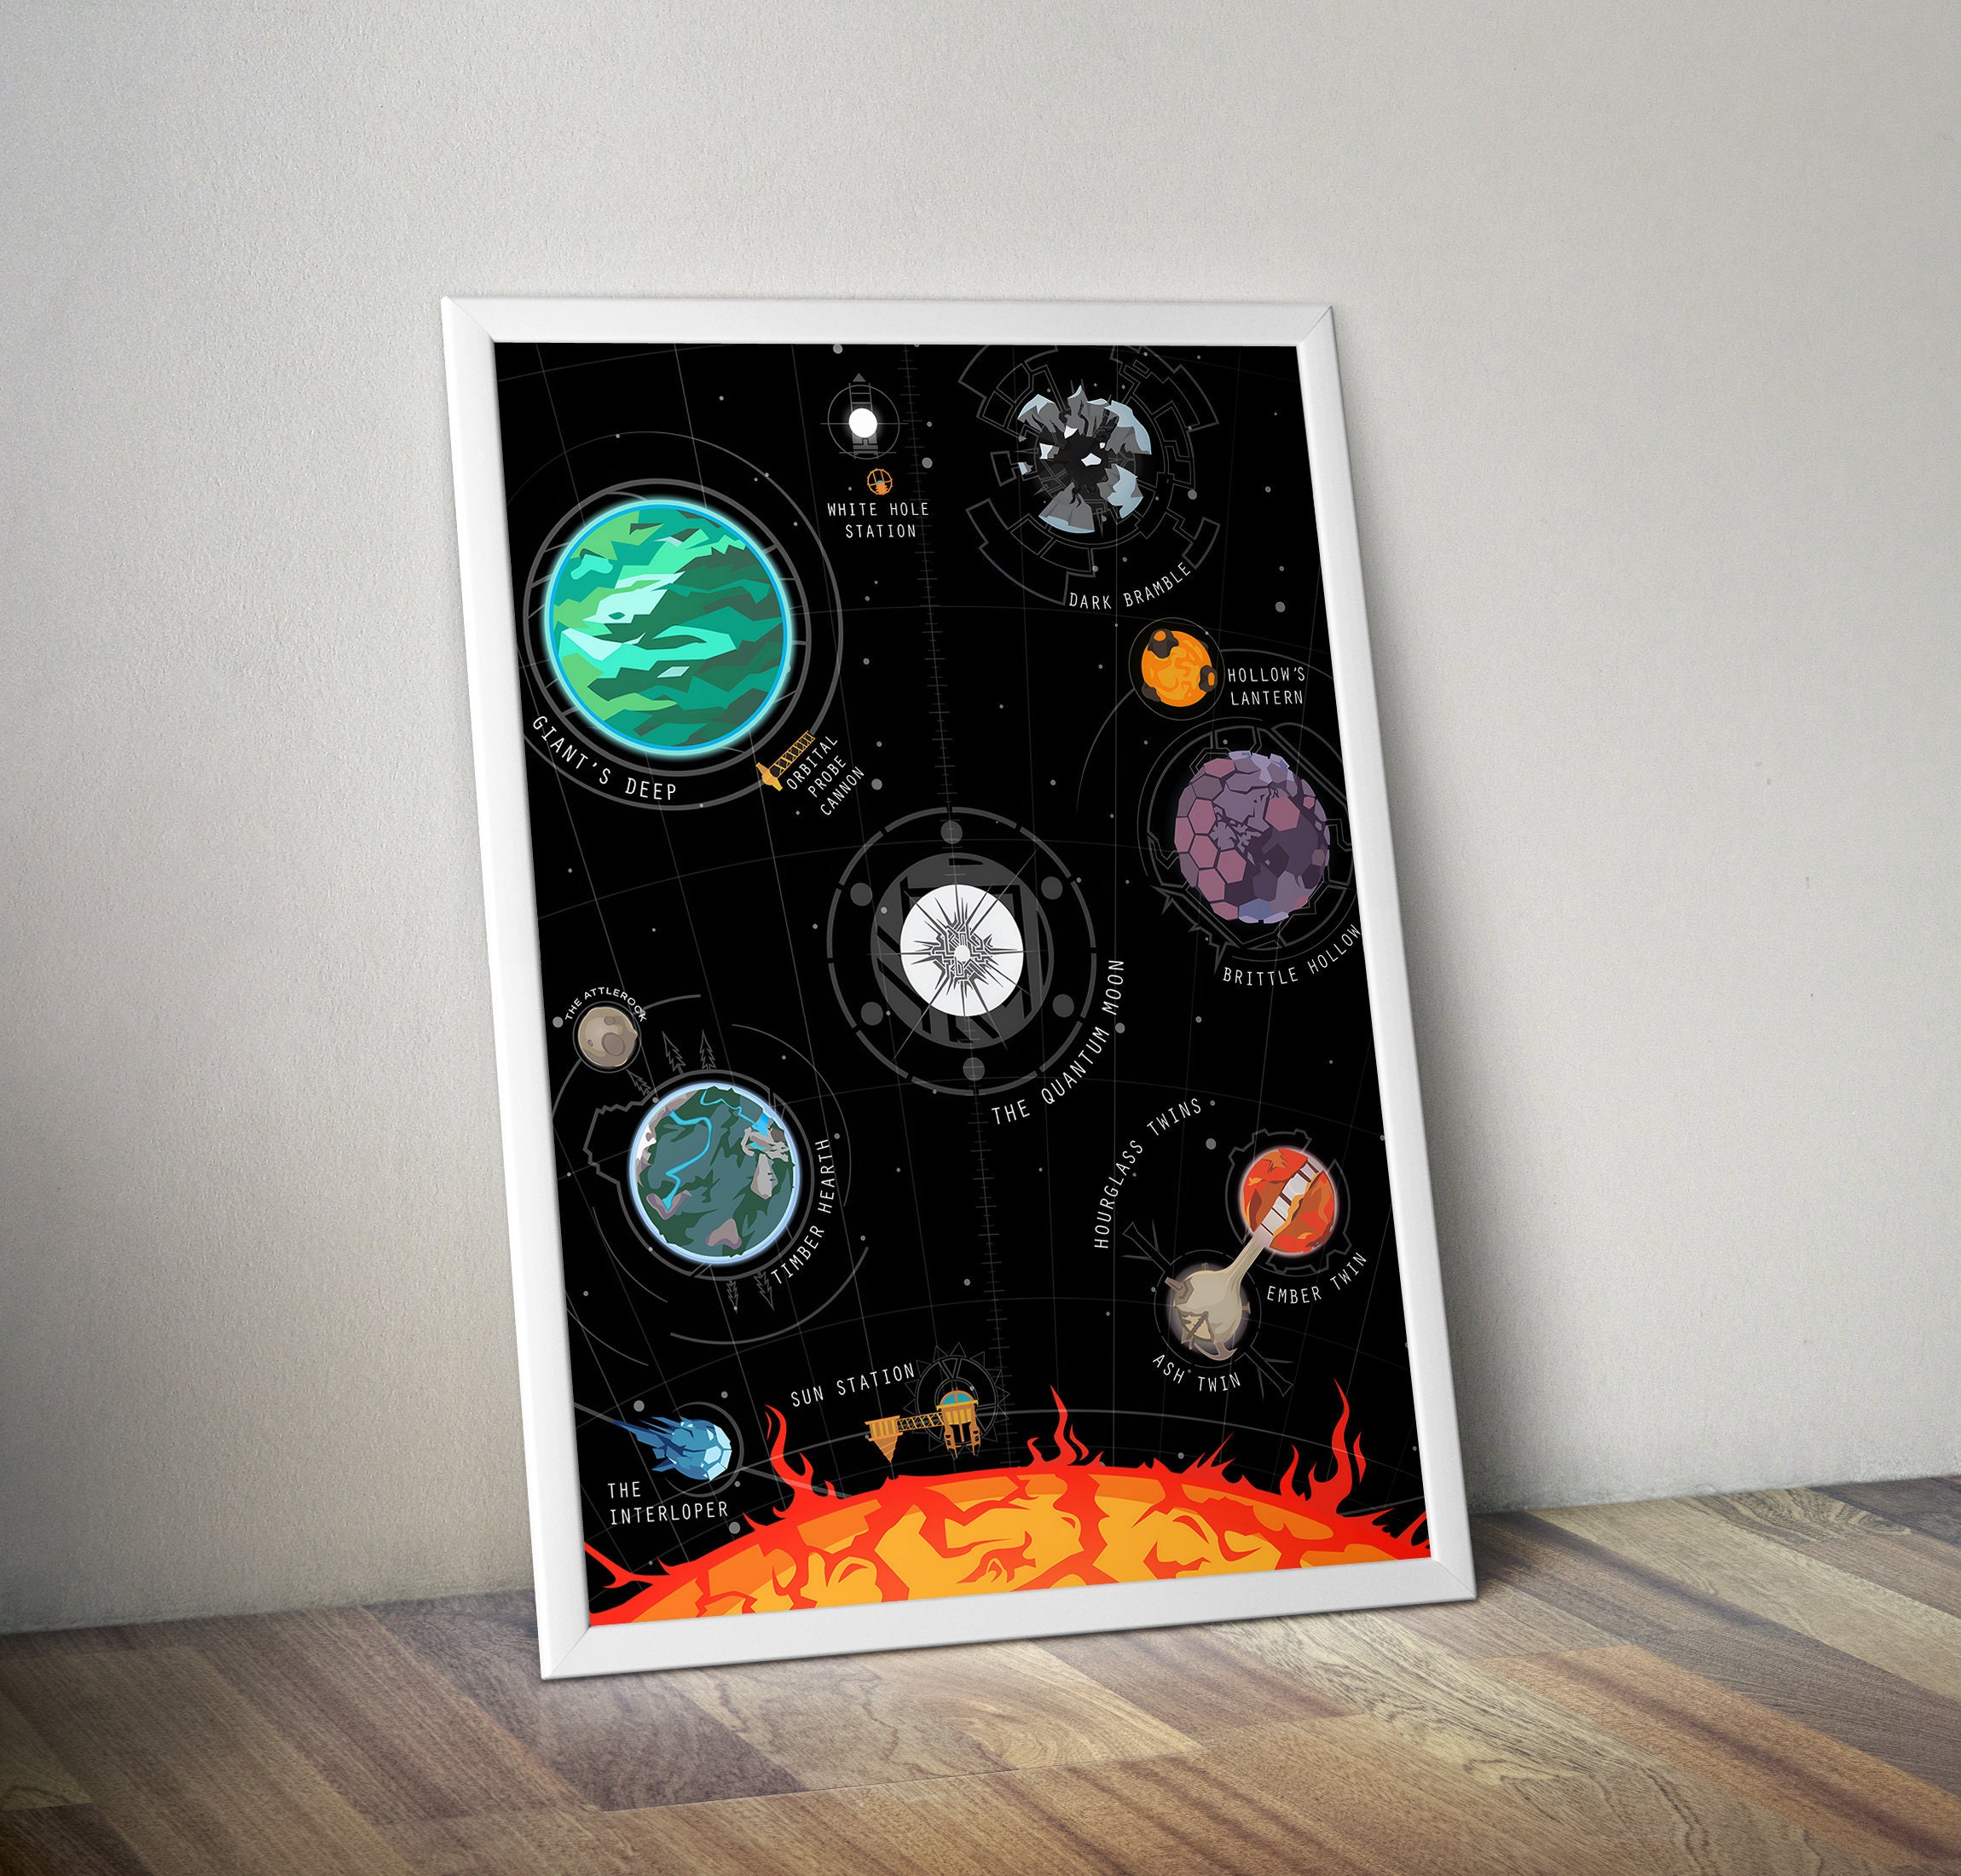 Outer Wilds Posters Online - Shop Unique Metal Prints, Pictures, Paintings